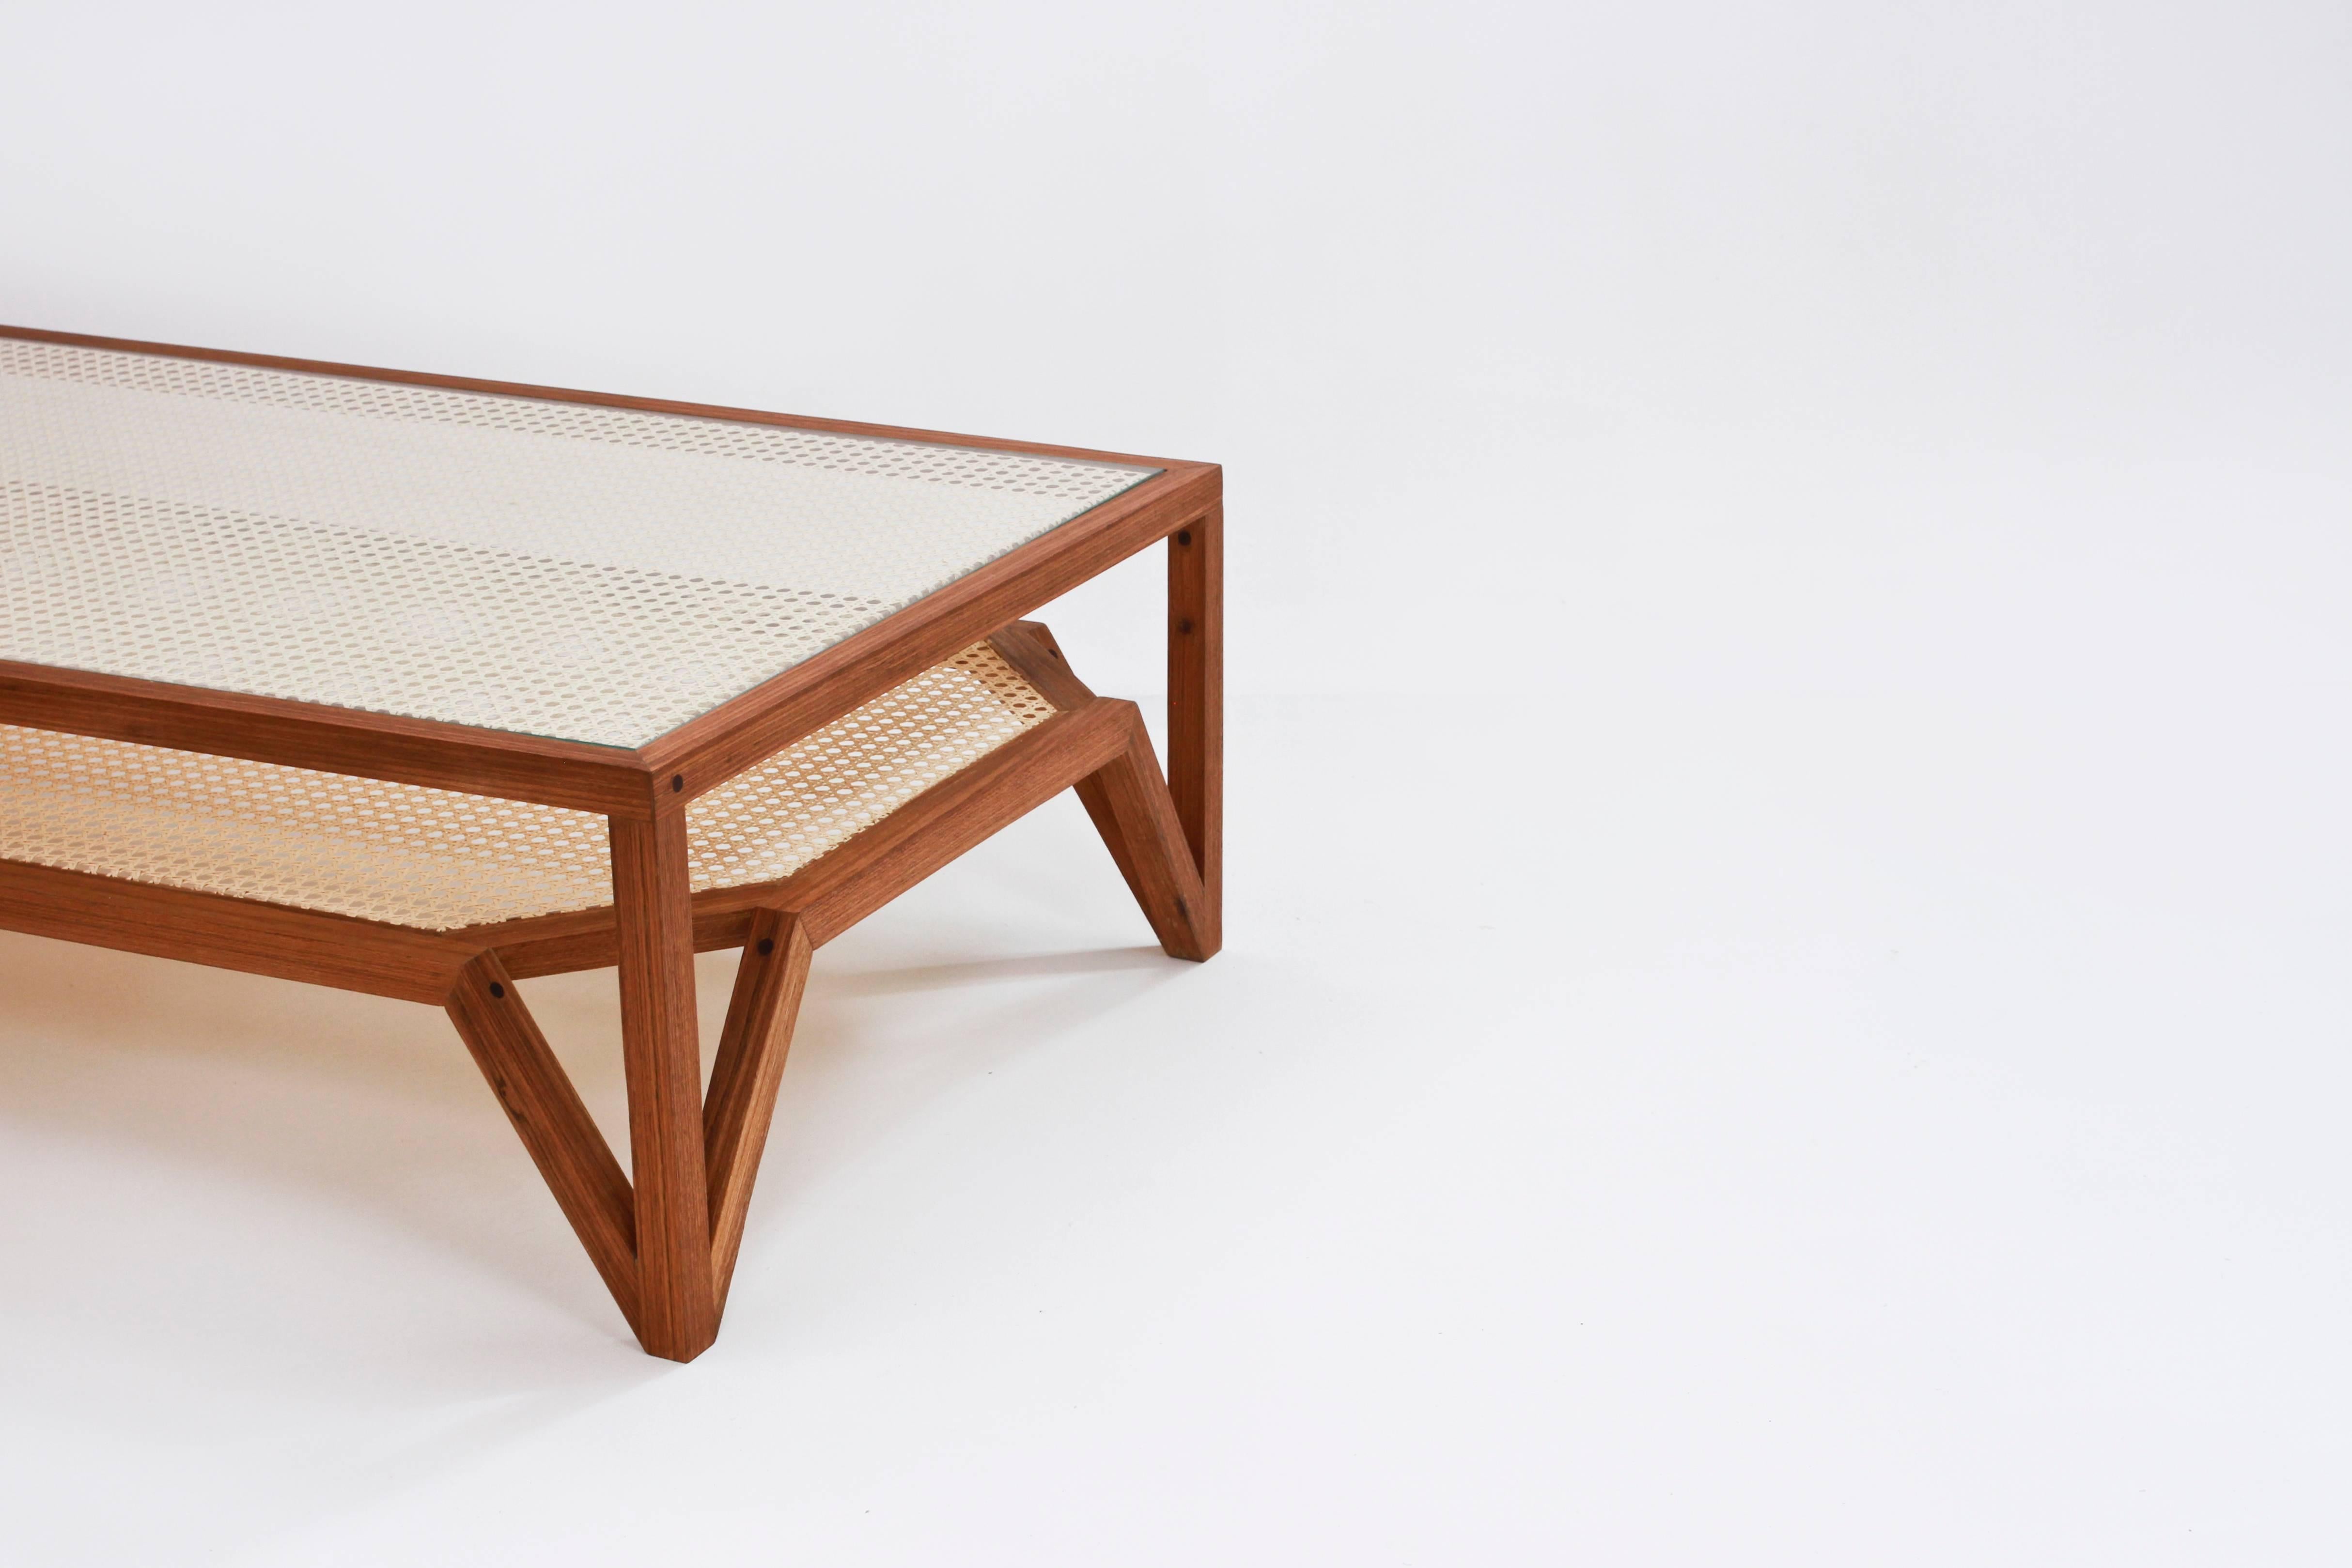 Woodwork Coffee Table in Hardwood and Woven Cane. Contemporary Design by O Formigueiro. For Sale